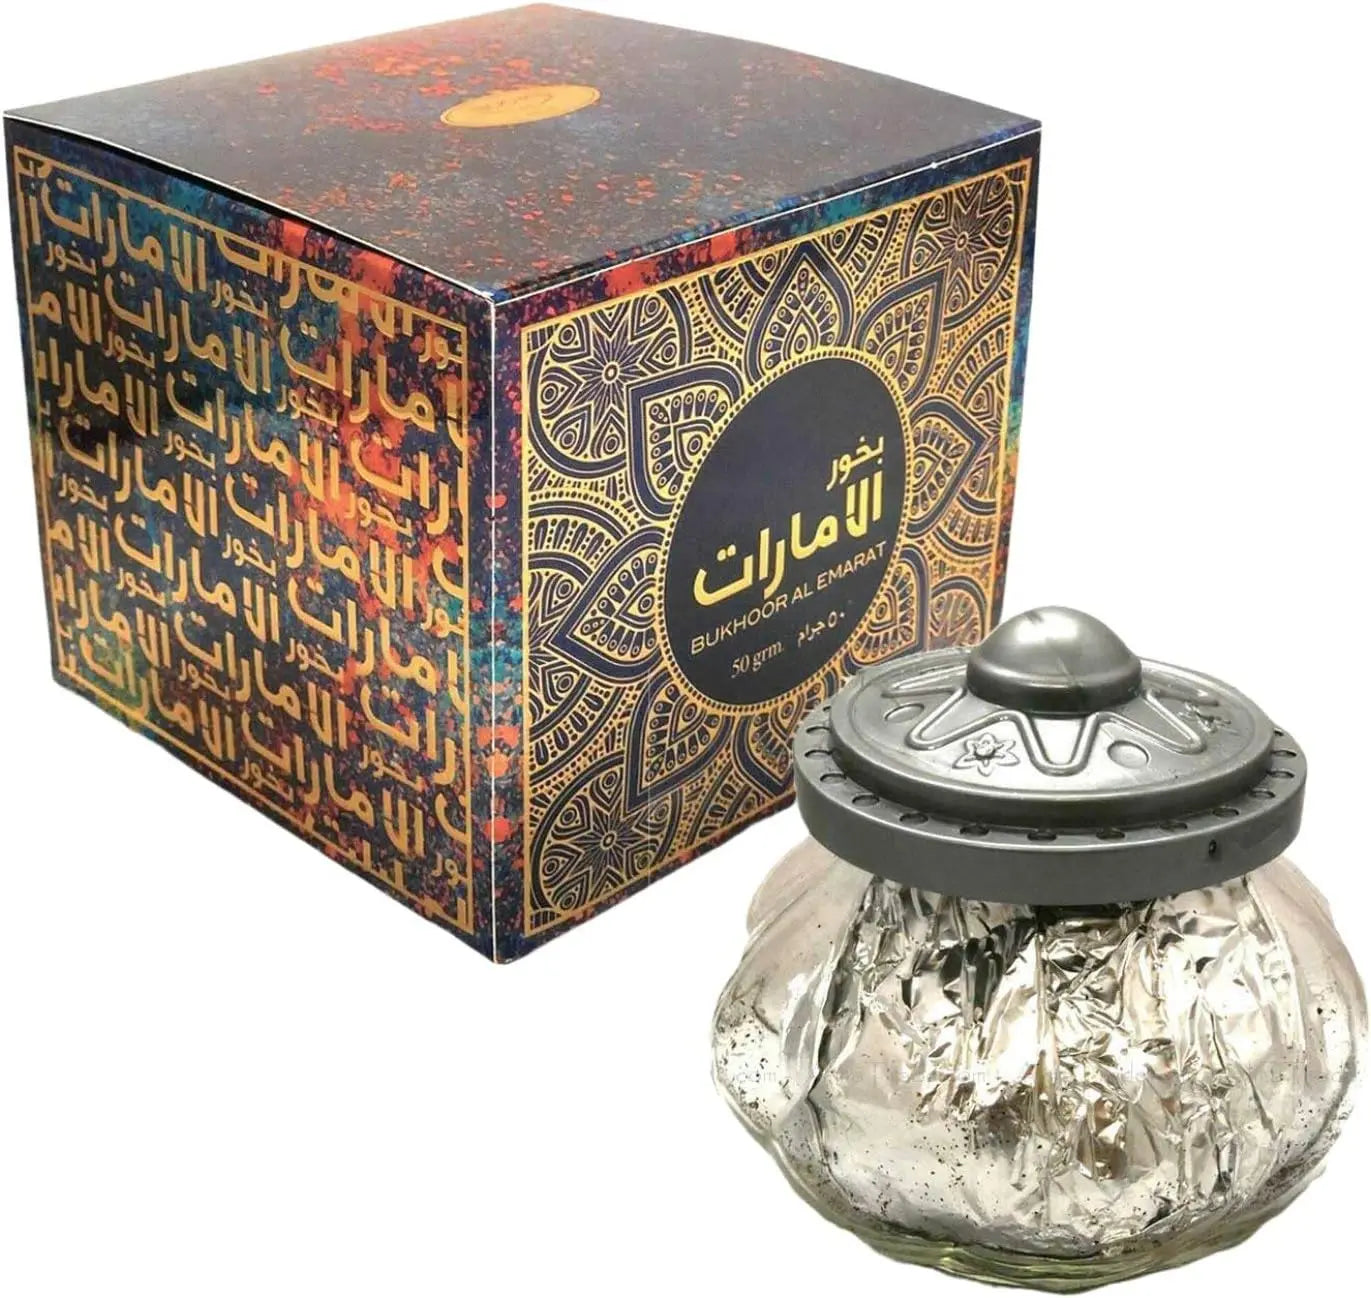 The image features "Bukhoor Al Emarat" by "Ard Al Zaafaran", which is presented as a luxurious traditional fragrance product. There is a cubic box with an elaborate pattern in gold, blue, and orange hues, featuring Arabic calligraphy and English text on its side, which indicates the product name. The box is open, revealing a rich, textured black interior. Accompanying the box is a decorative glass burner with a silver foil texture and a dark, metallic lid with ornamental designs.